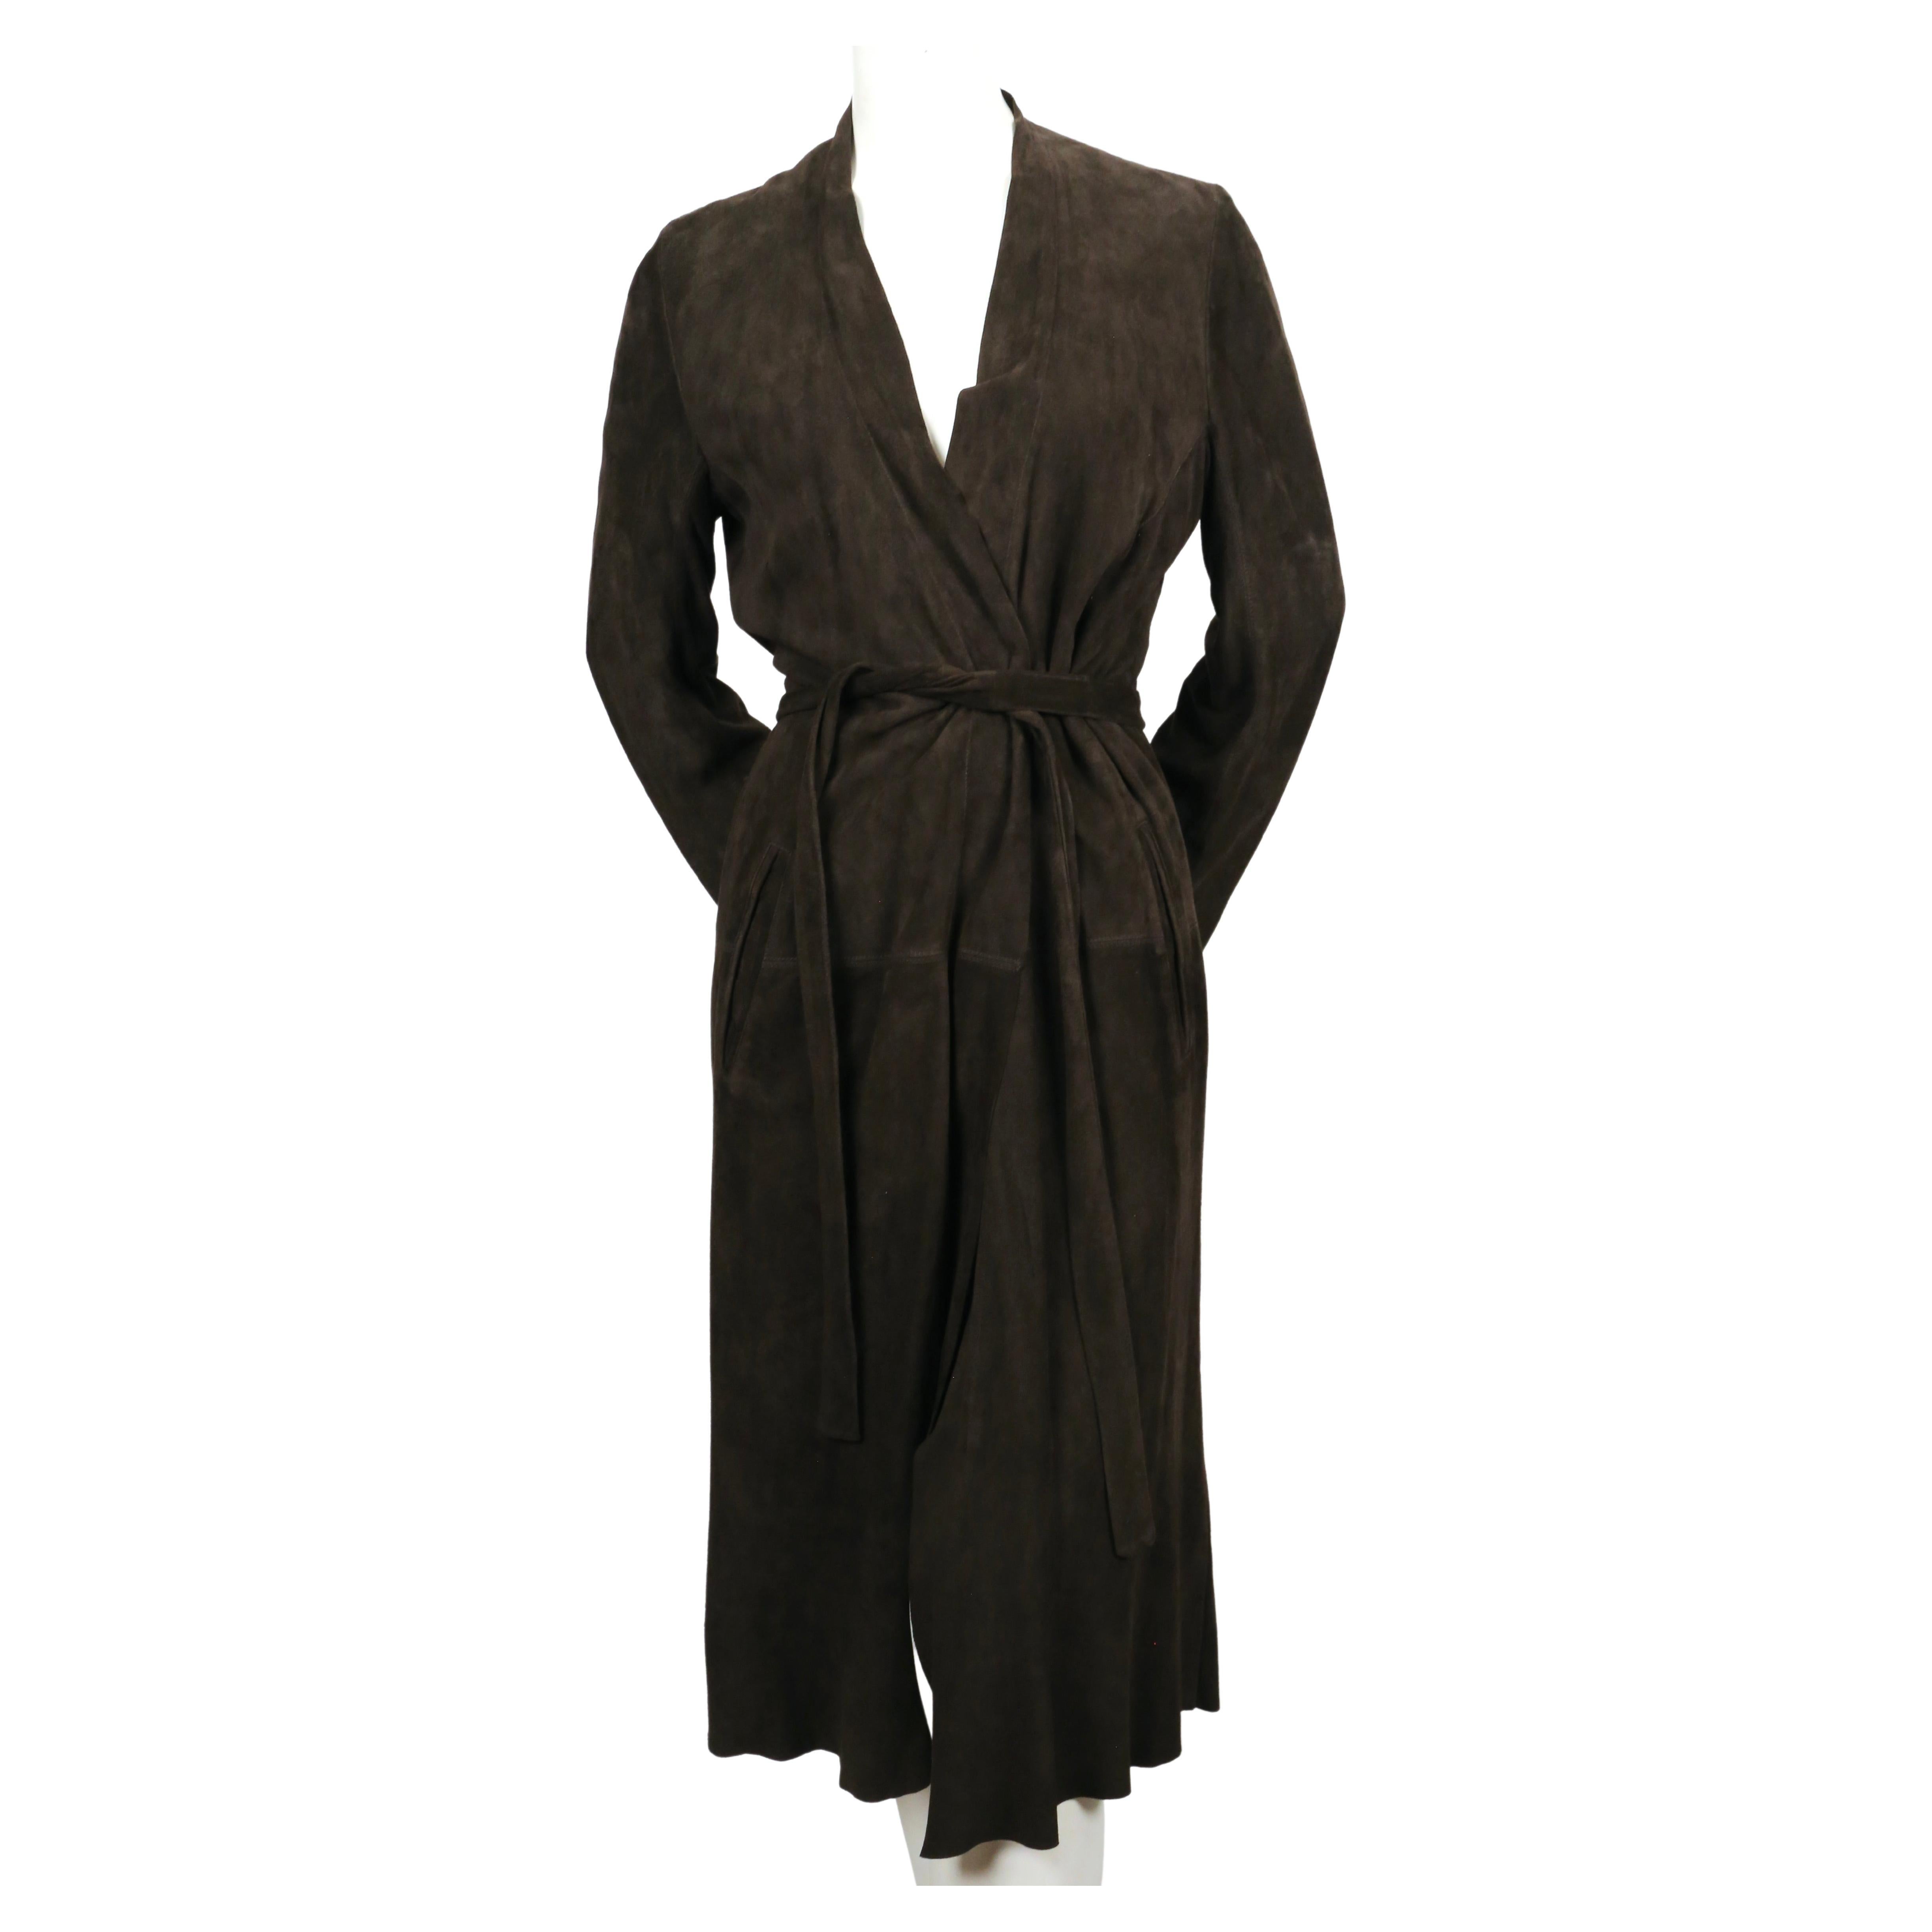 Dark brown, suede wrap coat designed by rick owens Rick Owens. No size labeled but this coat best fits a US 4 to a slim 8. Approximate measurements: shoulder 15